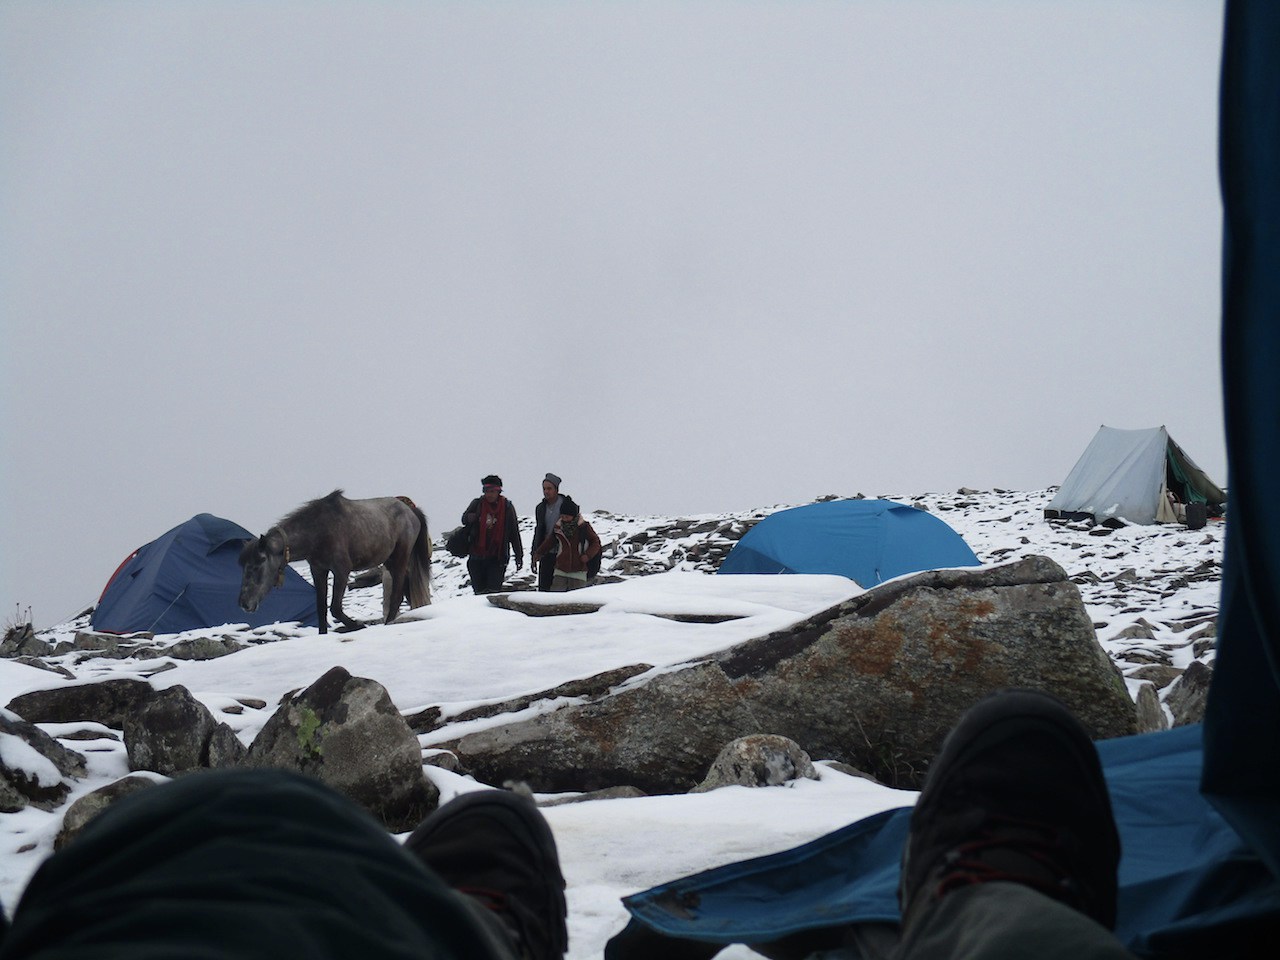 people walking behind the cattle seen from inside the tent